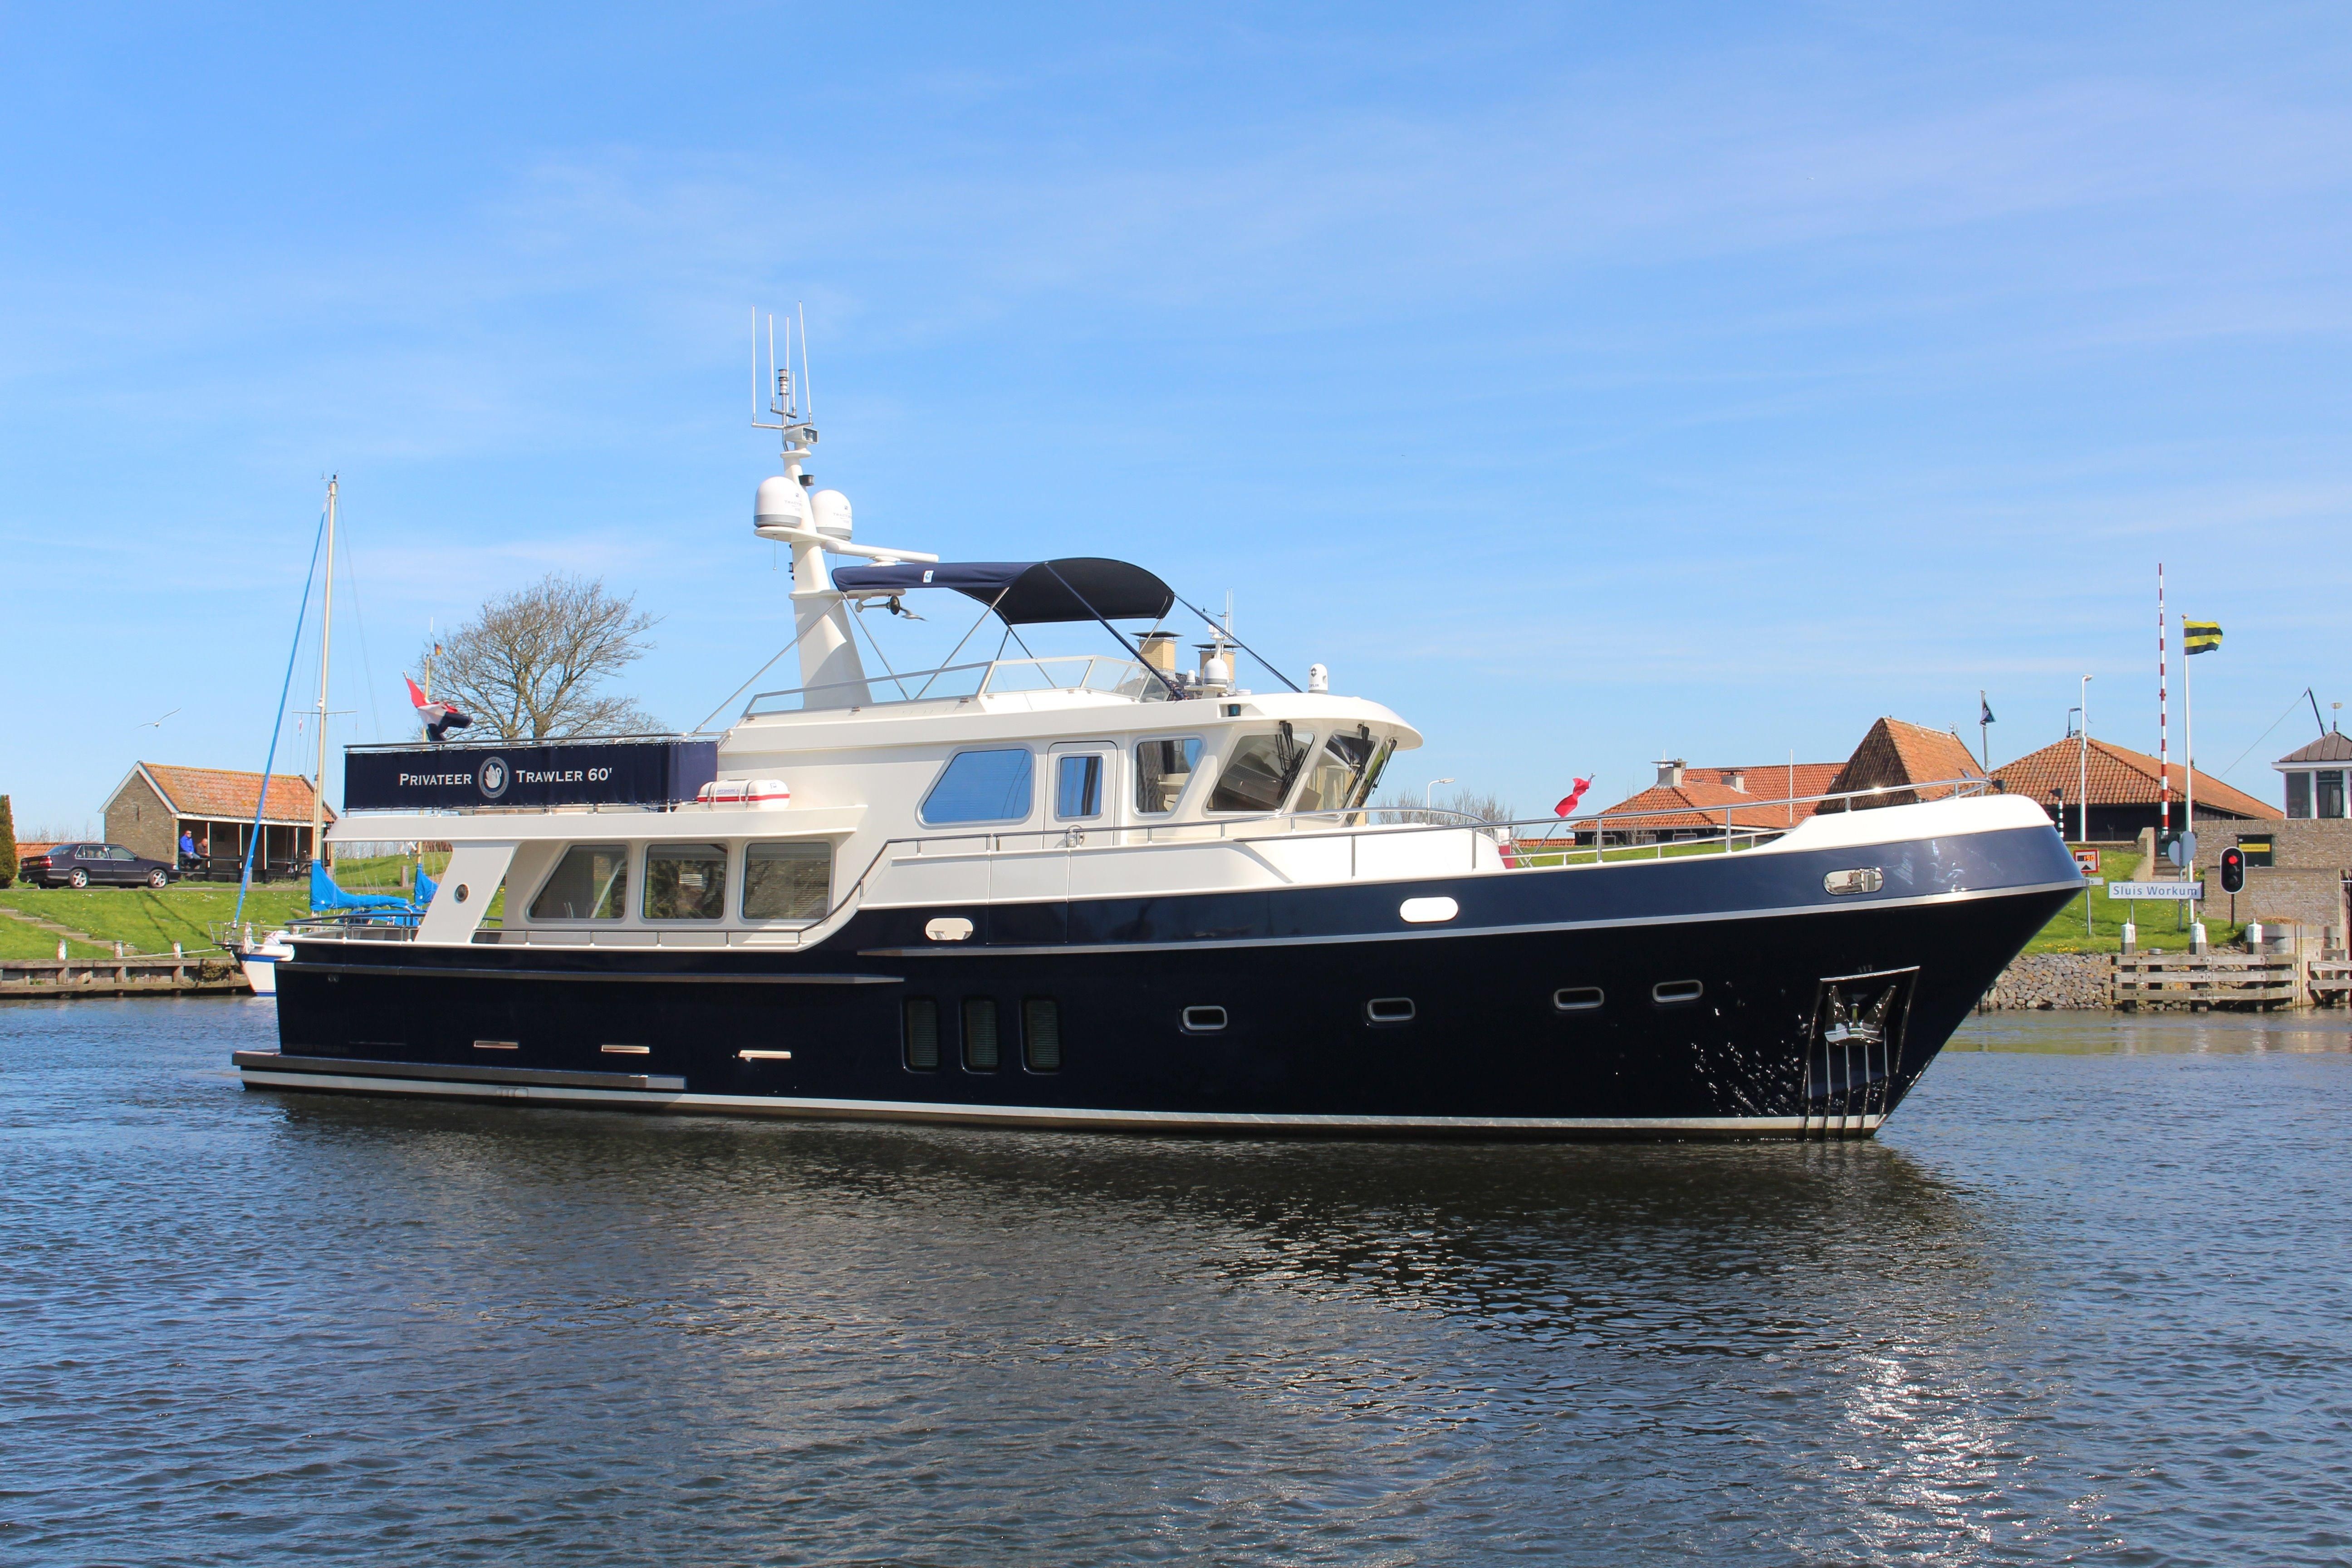 used yacht for sale uk